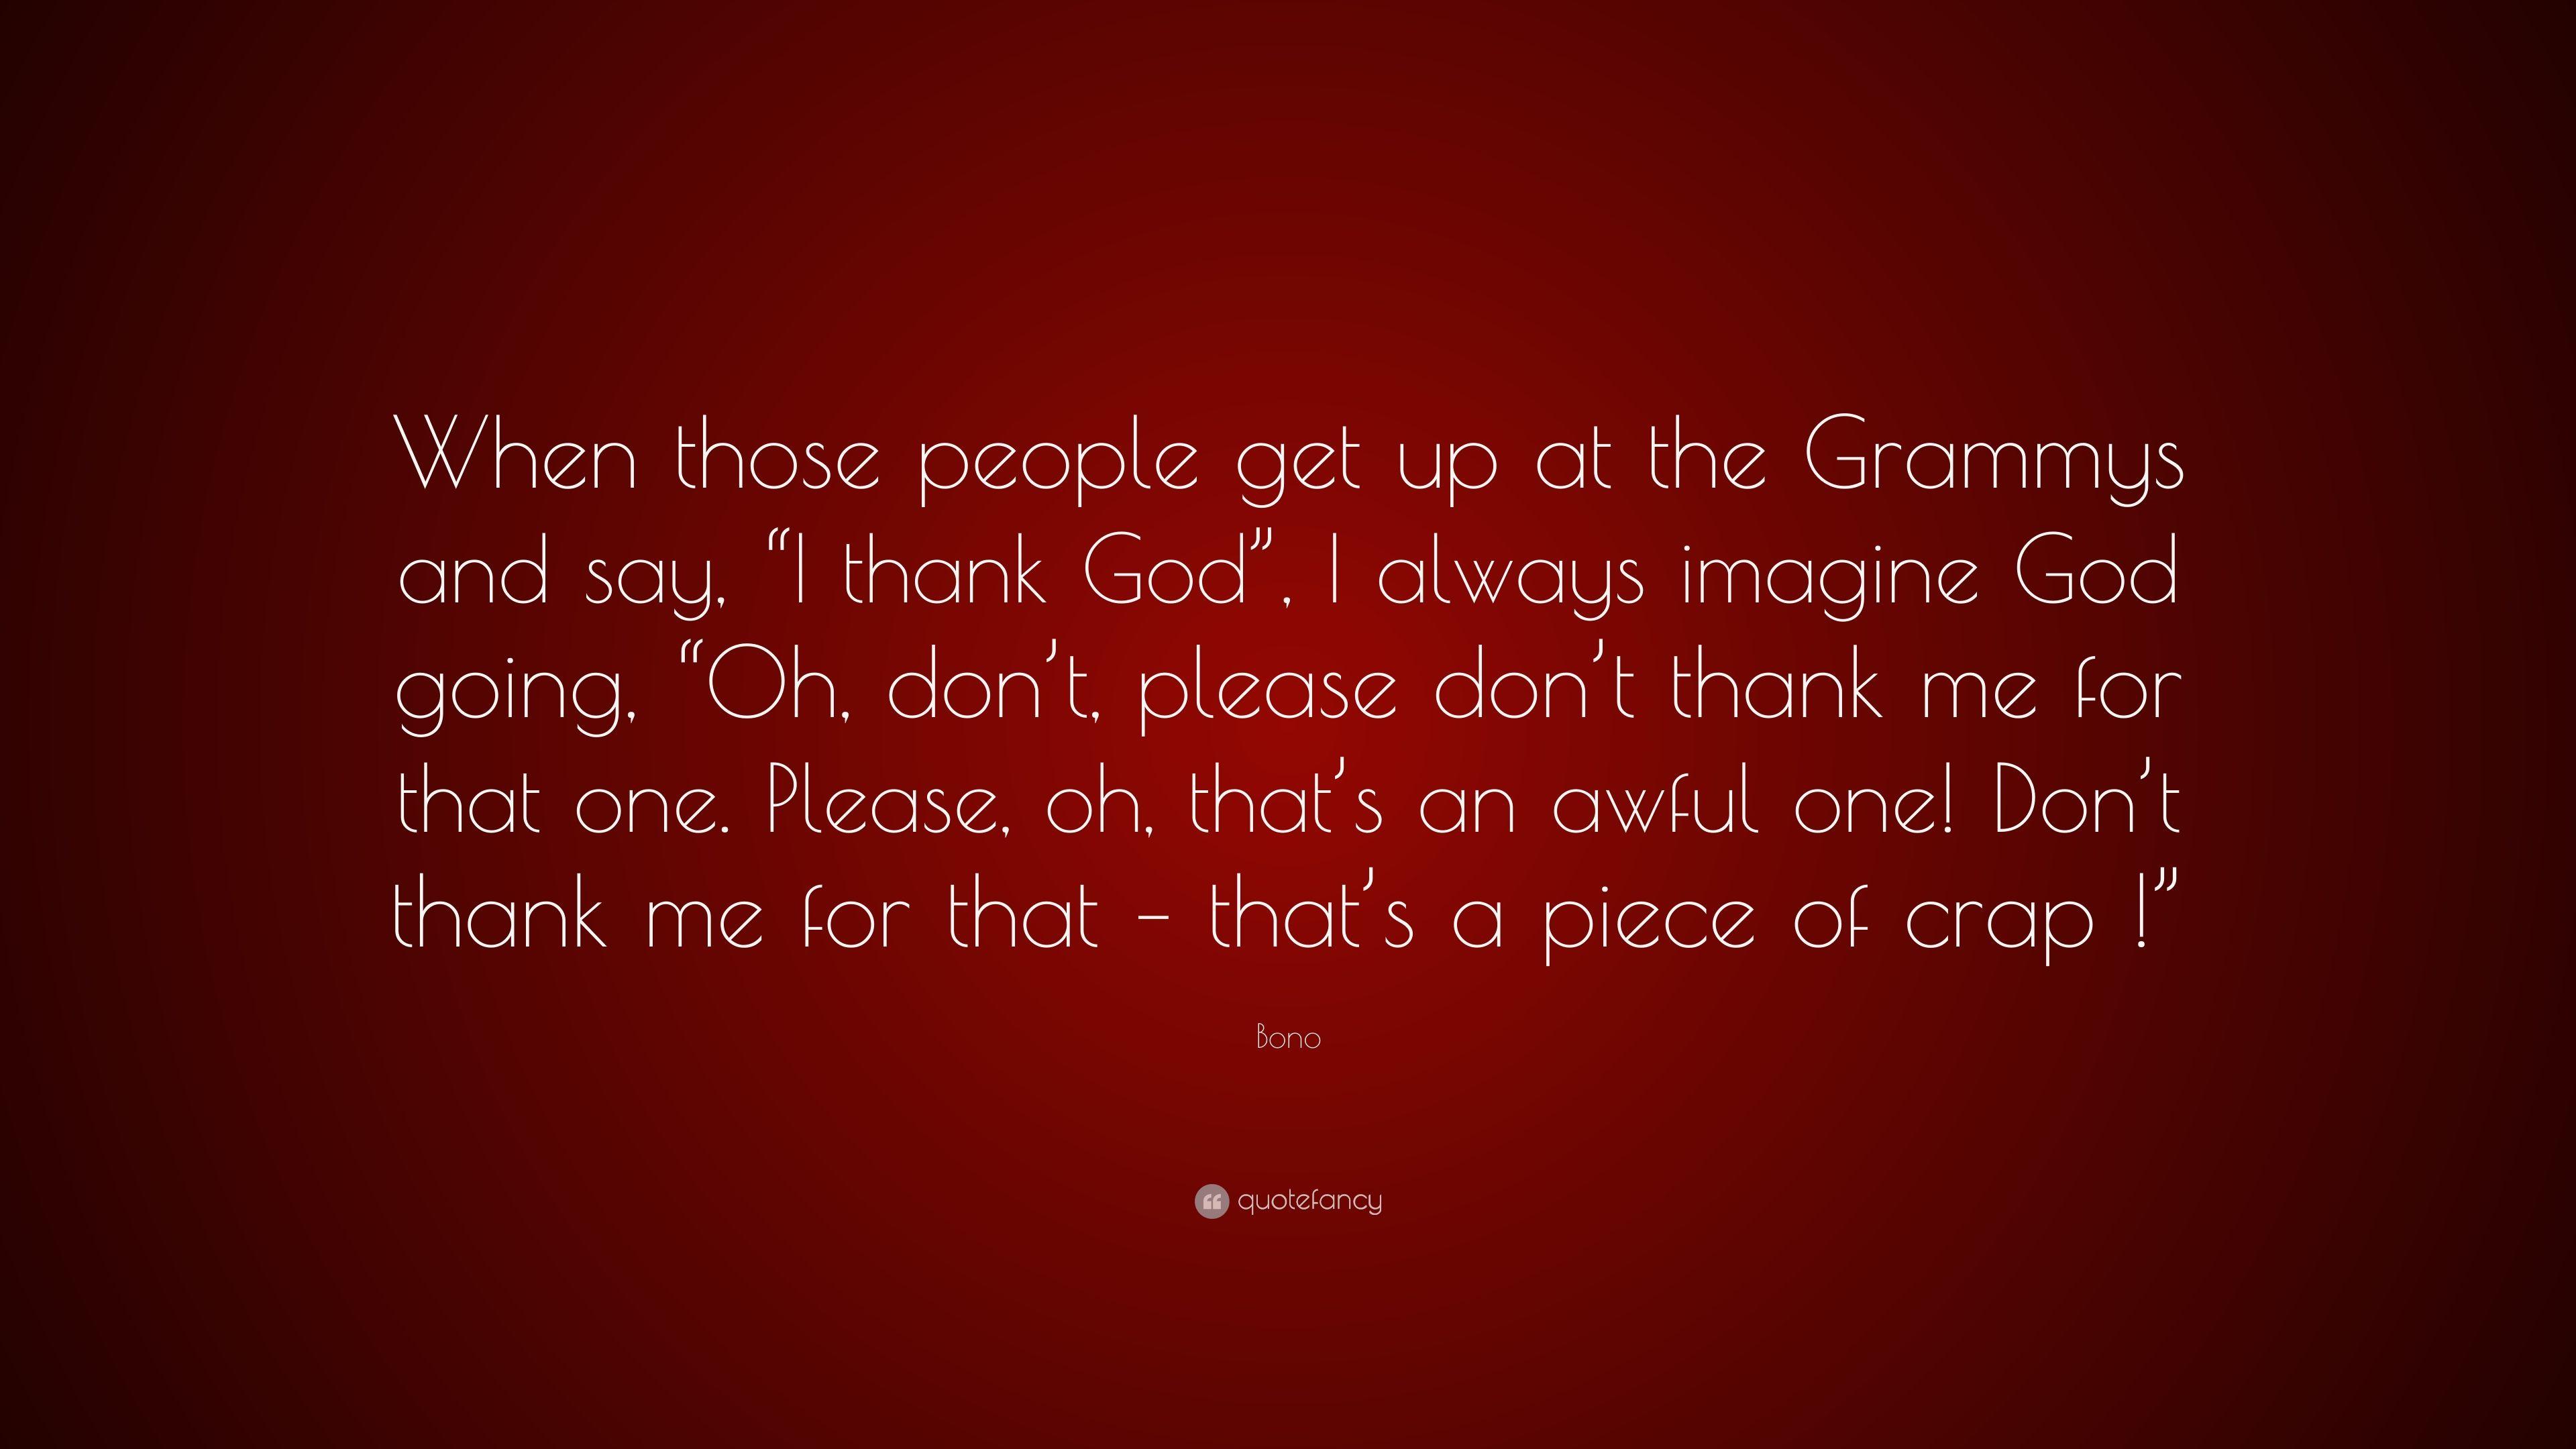 Bono Quote: “When those people get up at the Grammys and say, “I